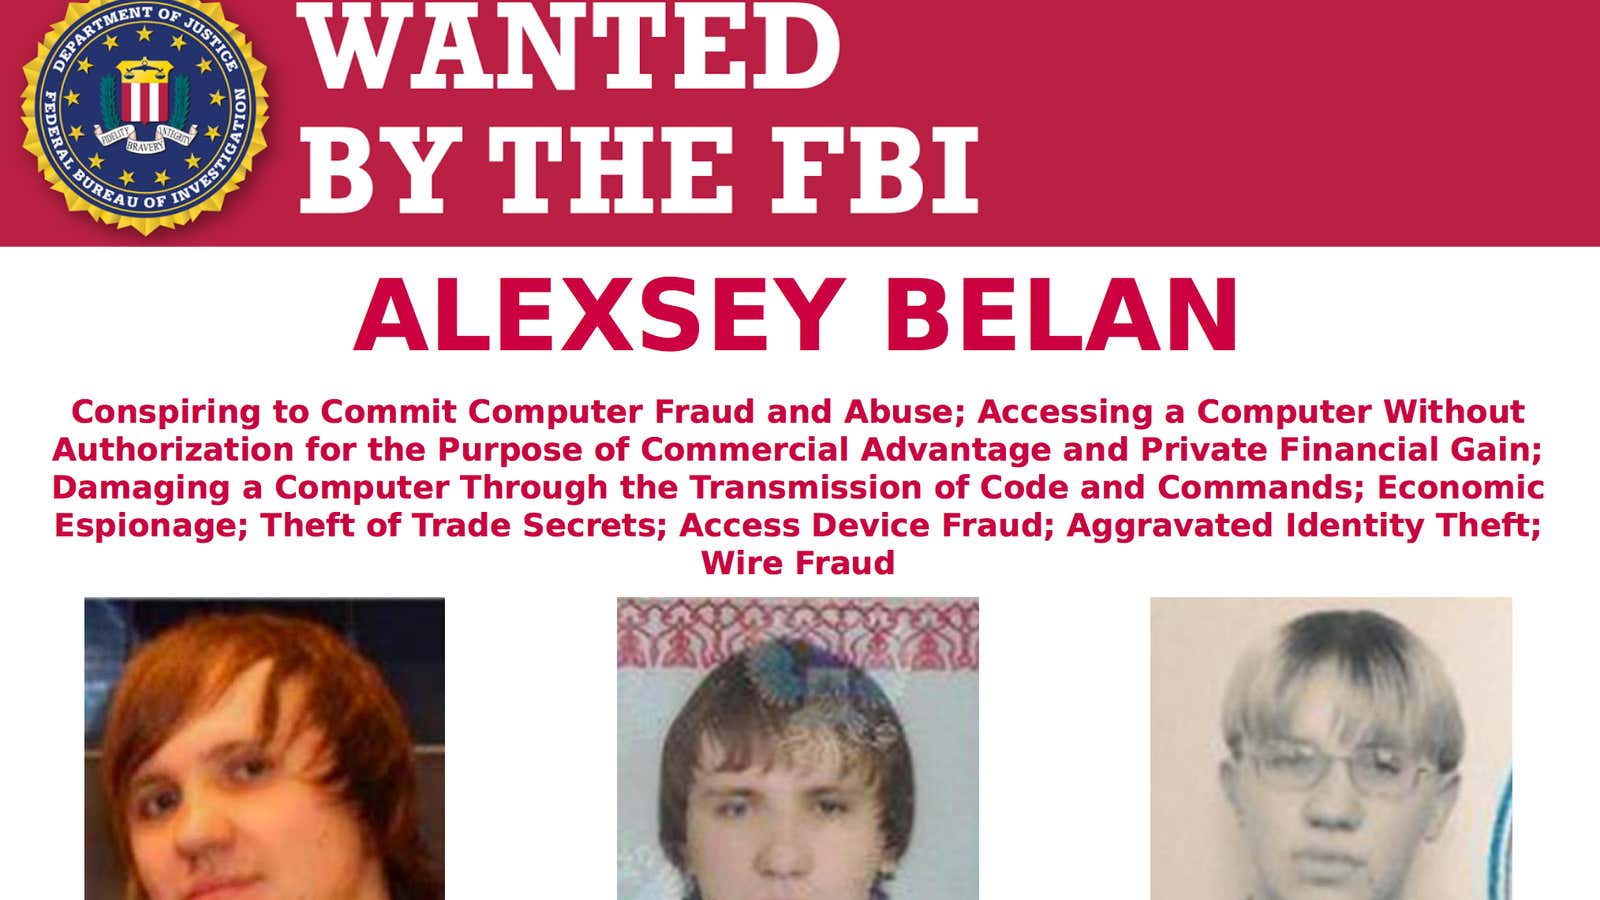 Alexsey Belan is one of the FBI’s most wanted cyber criminals